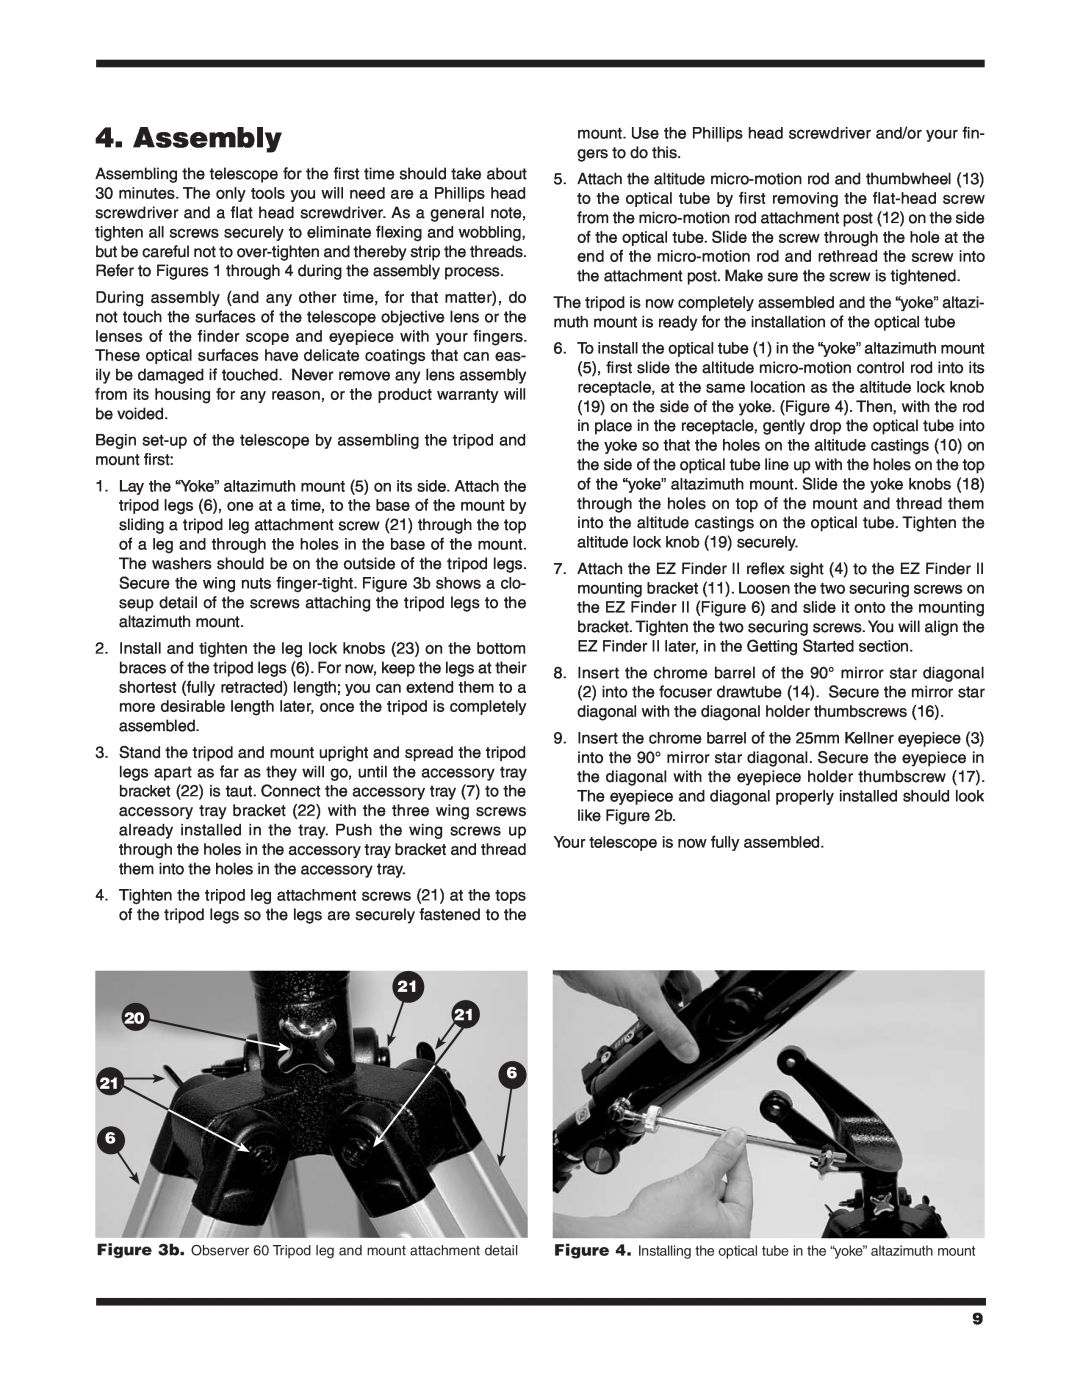 Orion 9854 instruction manual Assembly 